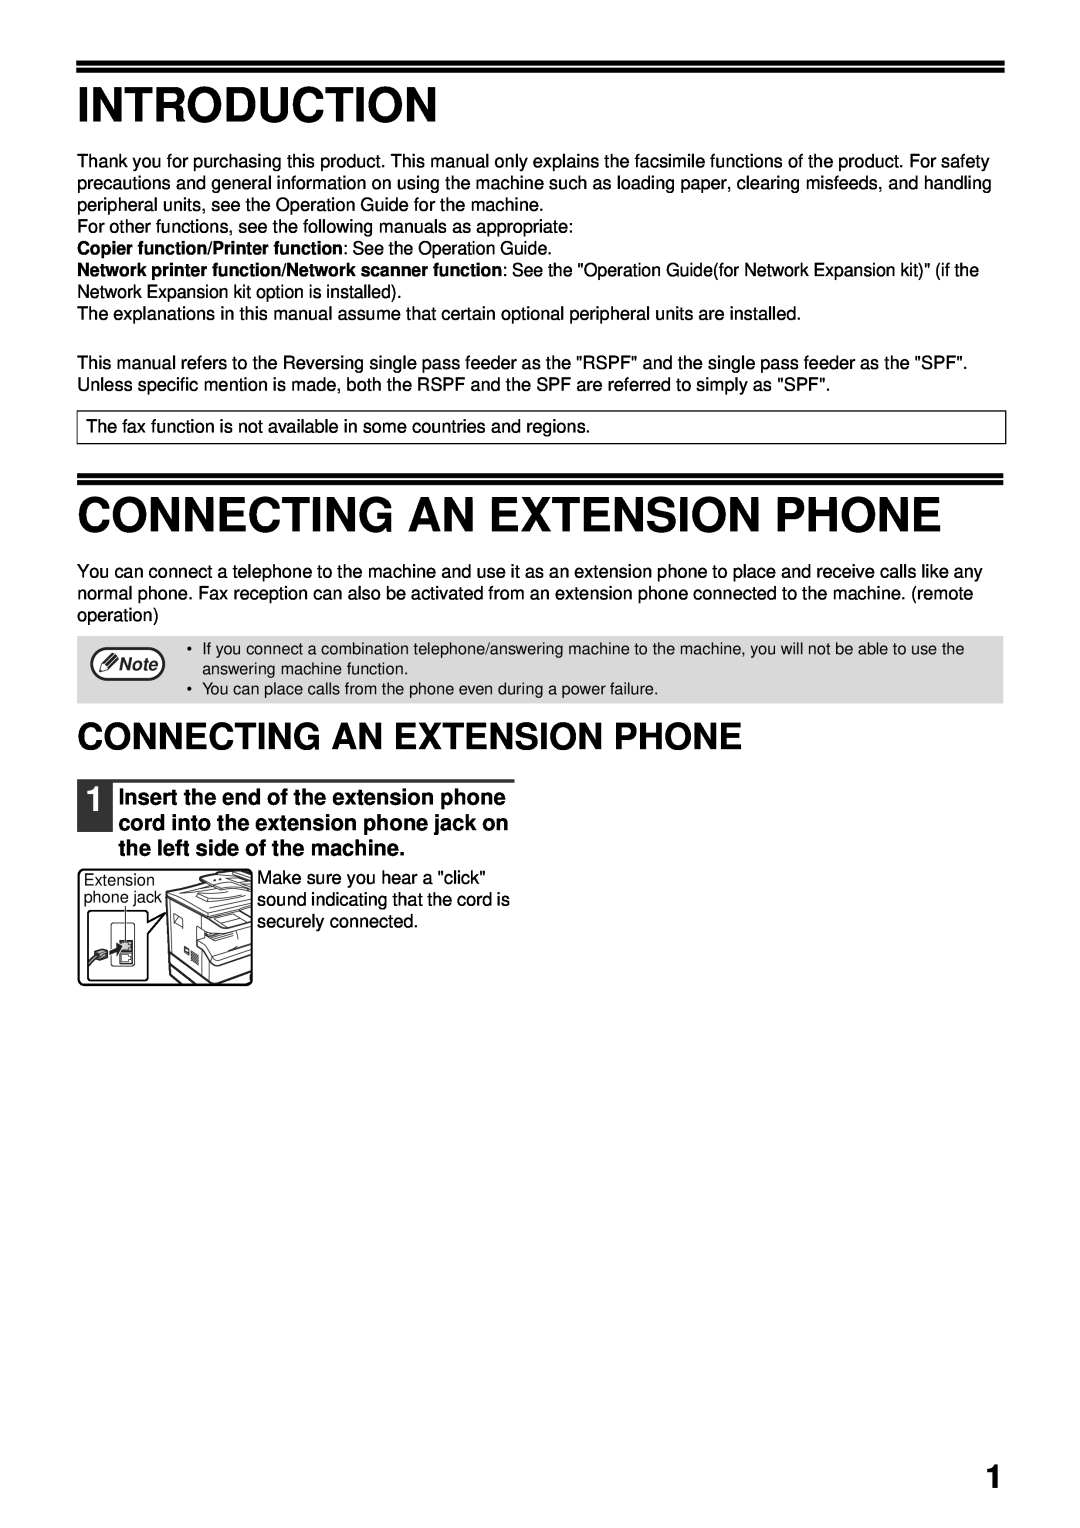 Sharp MX-FX13 appendix Introduction, Connecting An Extension Phone 